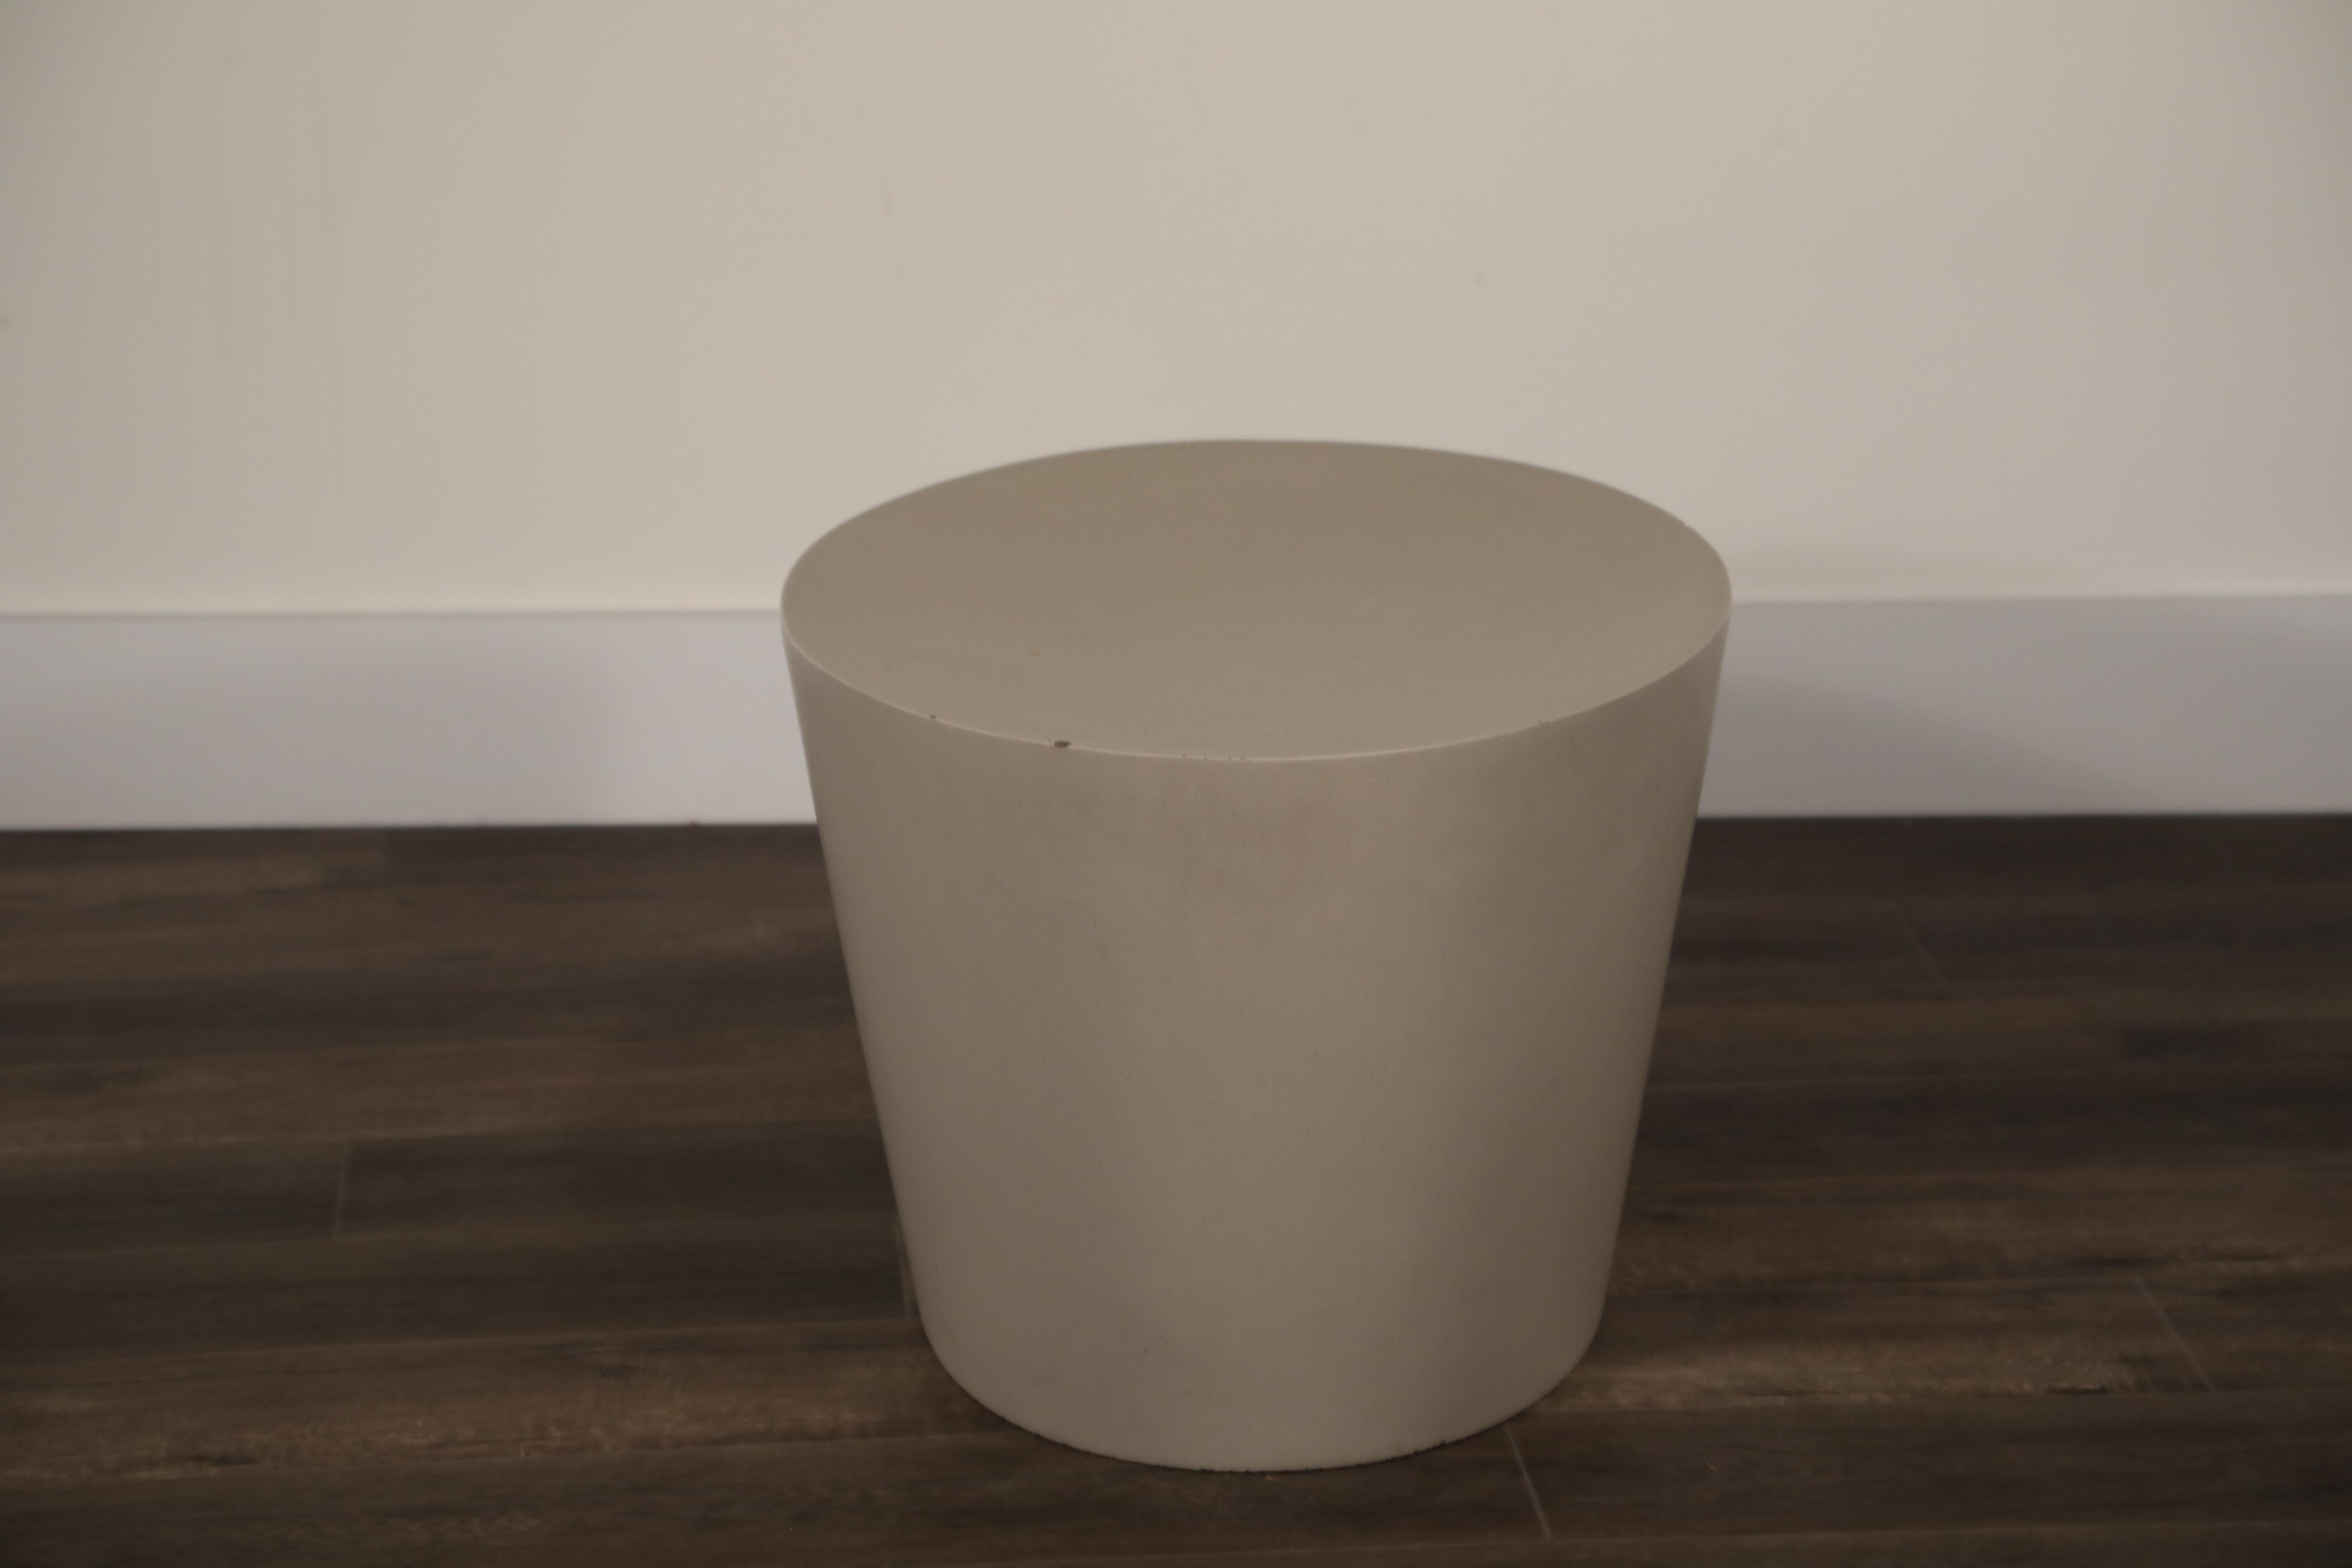 Maya Lin 1st-Generation Concrete Stool for Knoll Studio, Signed and Stamped 1998 6